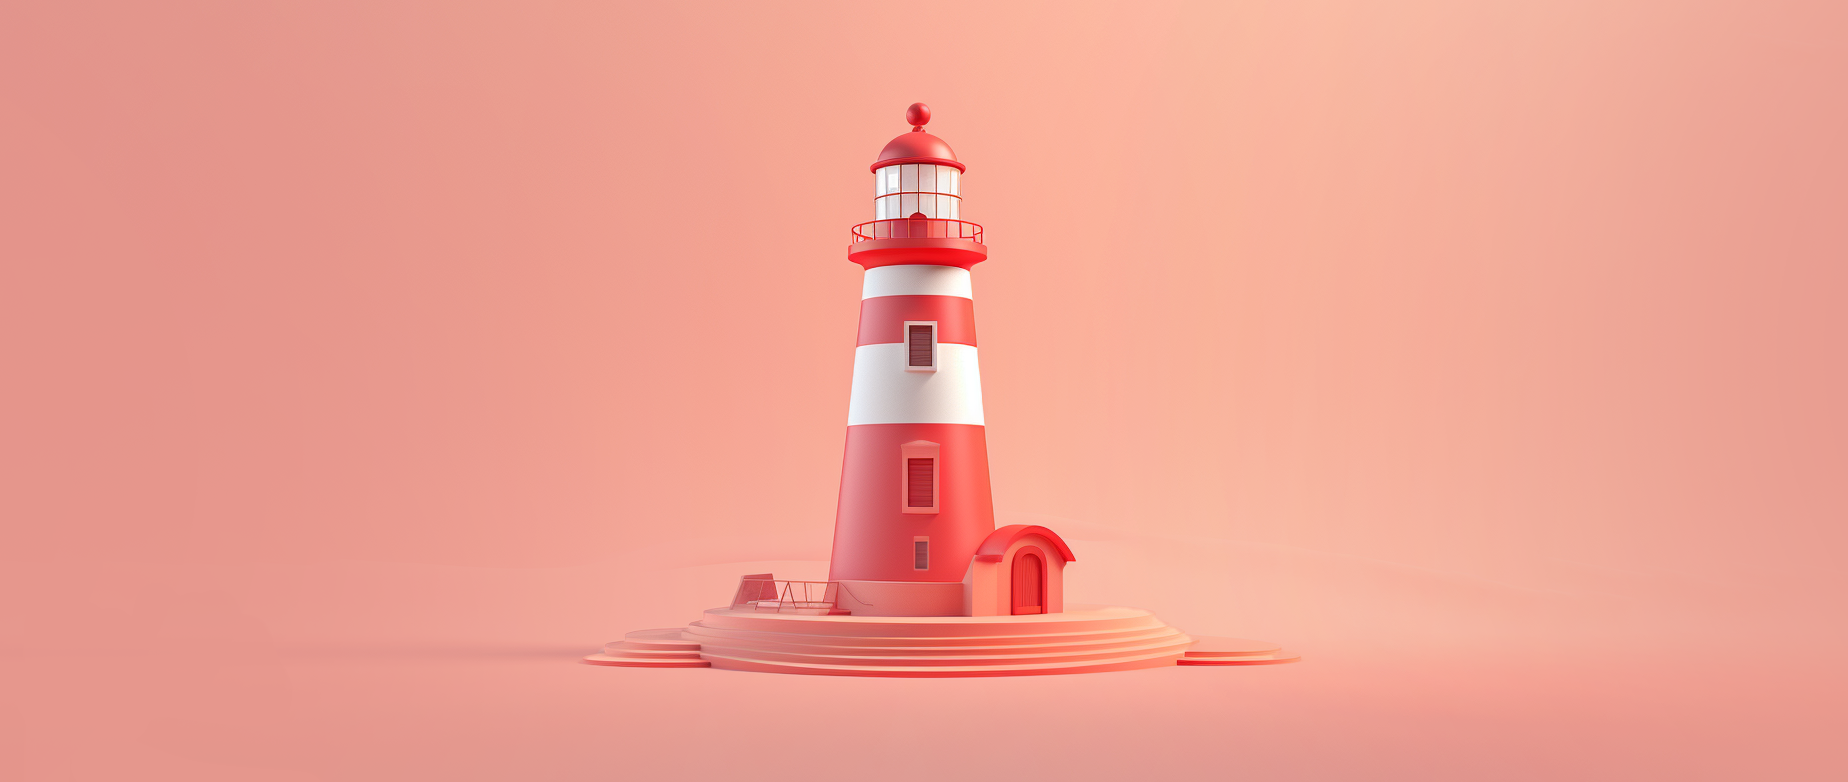 A red cartoon lighthouse on a salmon background.